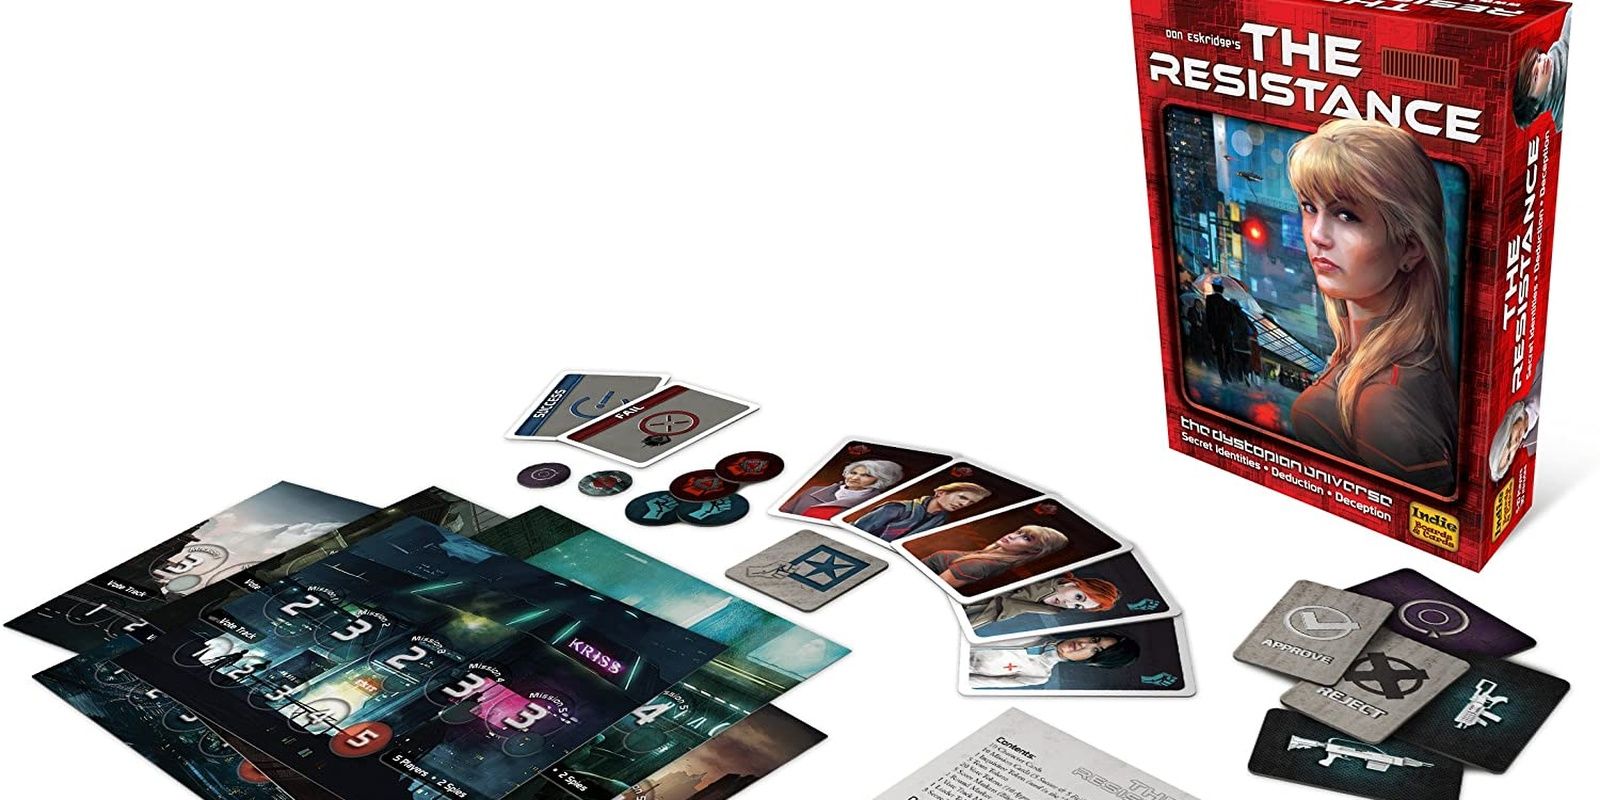 The Resistance board game box and its components